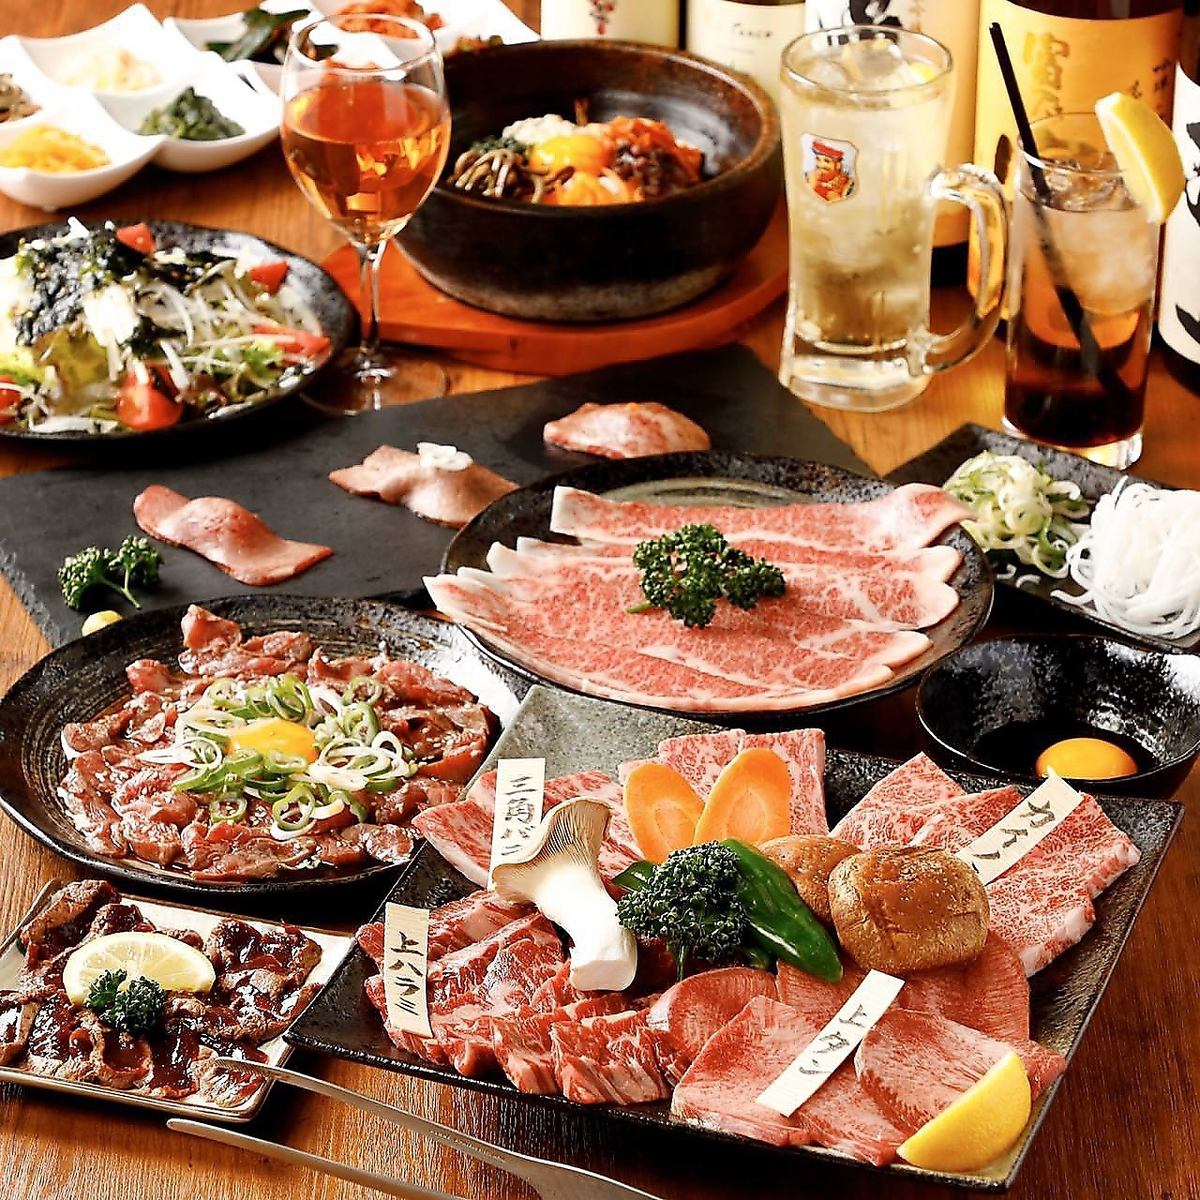 The banquet menu is also fulfilling in Otoboke! Please contact us!